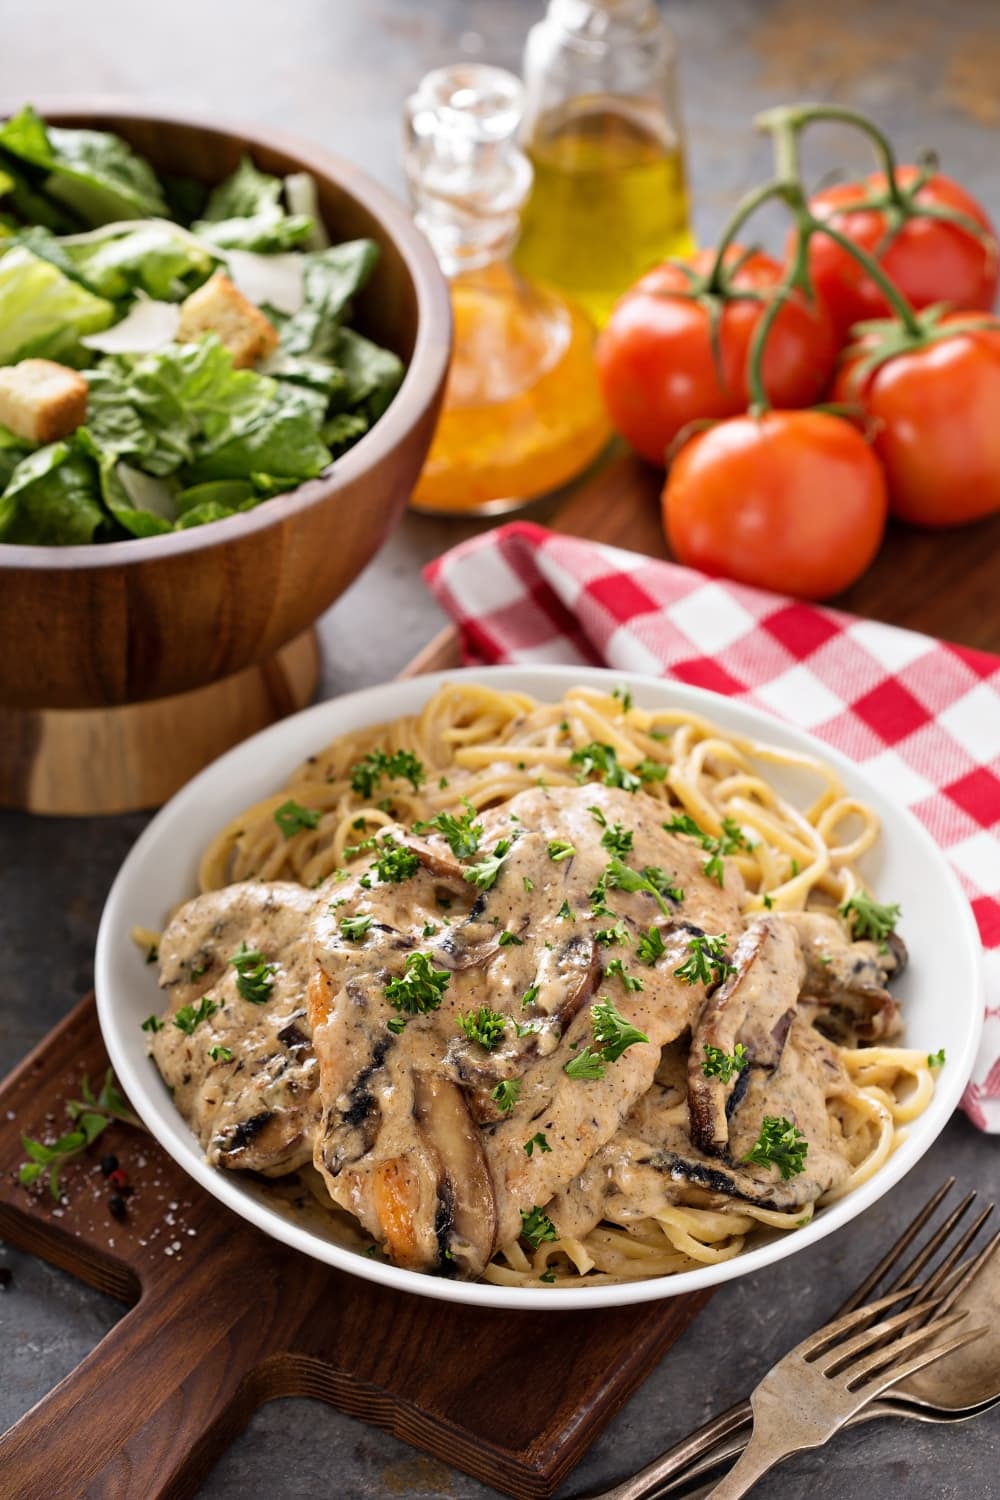 Delicious Homemade Chicken Marsala with Pasta and Mushrooms Served with Green Salad